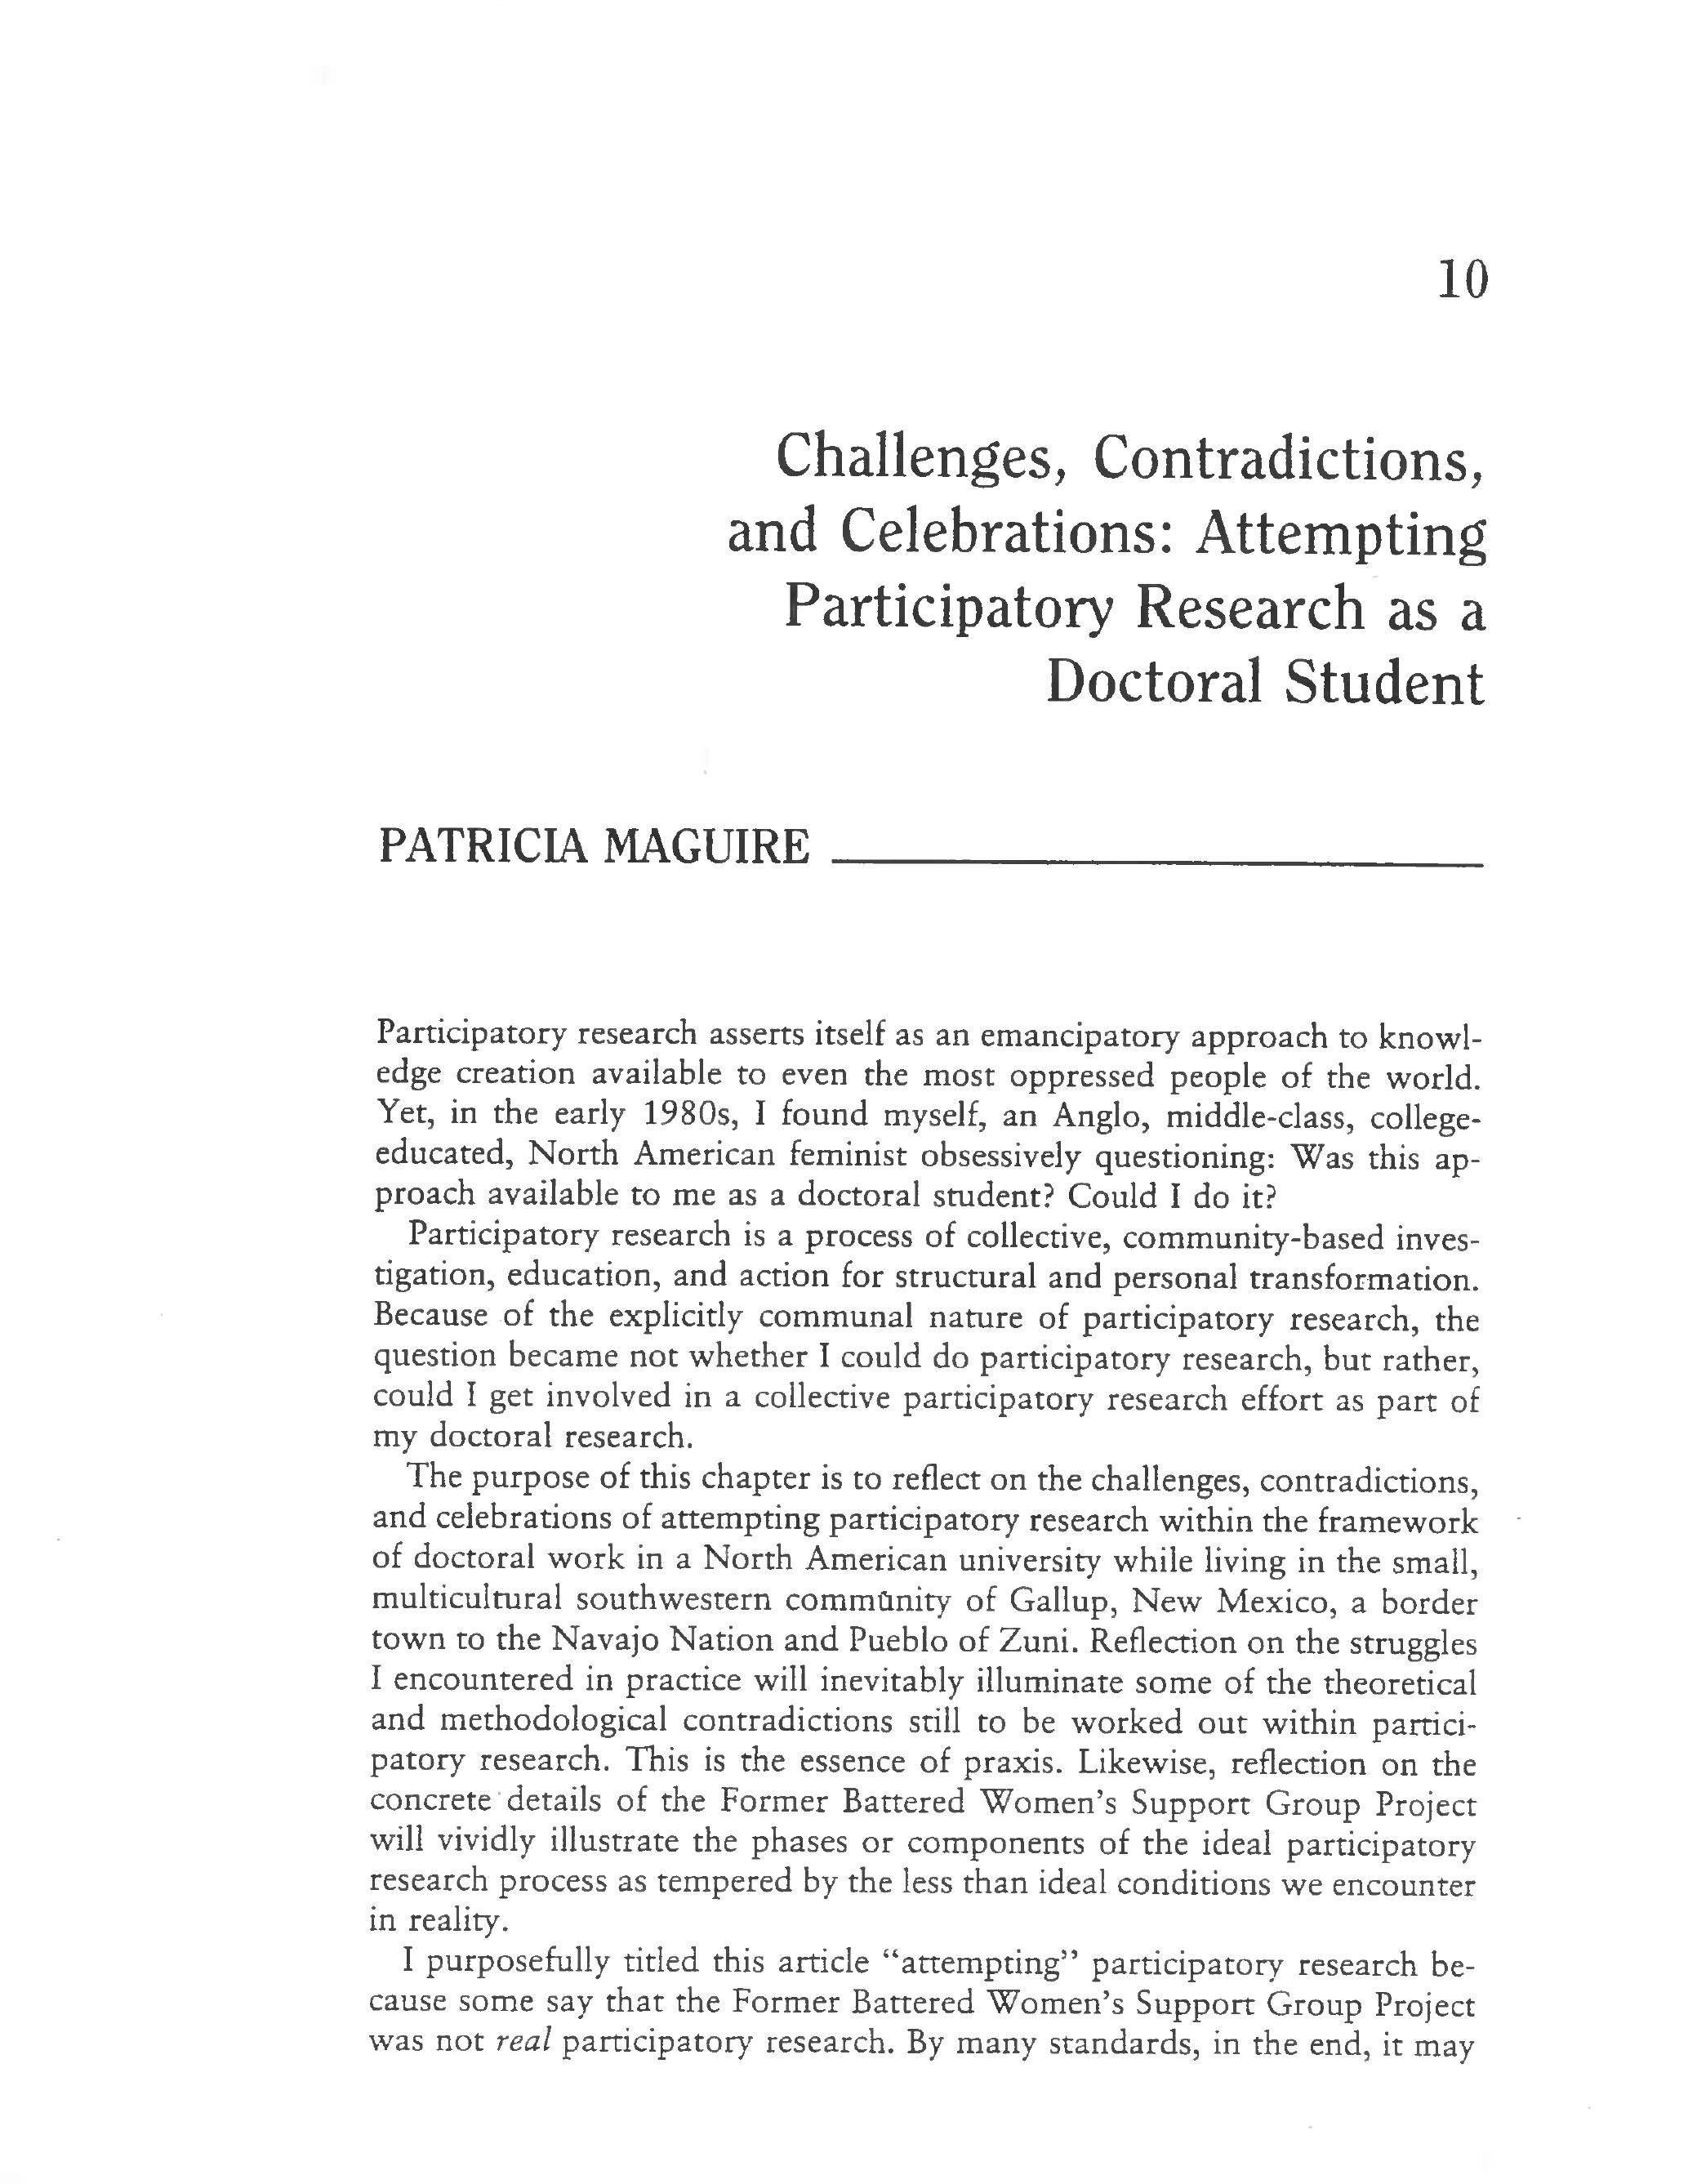 Challenges, contradictions, and celebrations: Attempting participatory research as a doctoral student